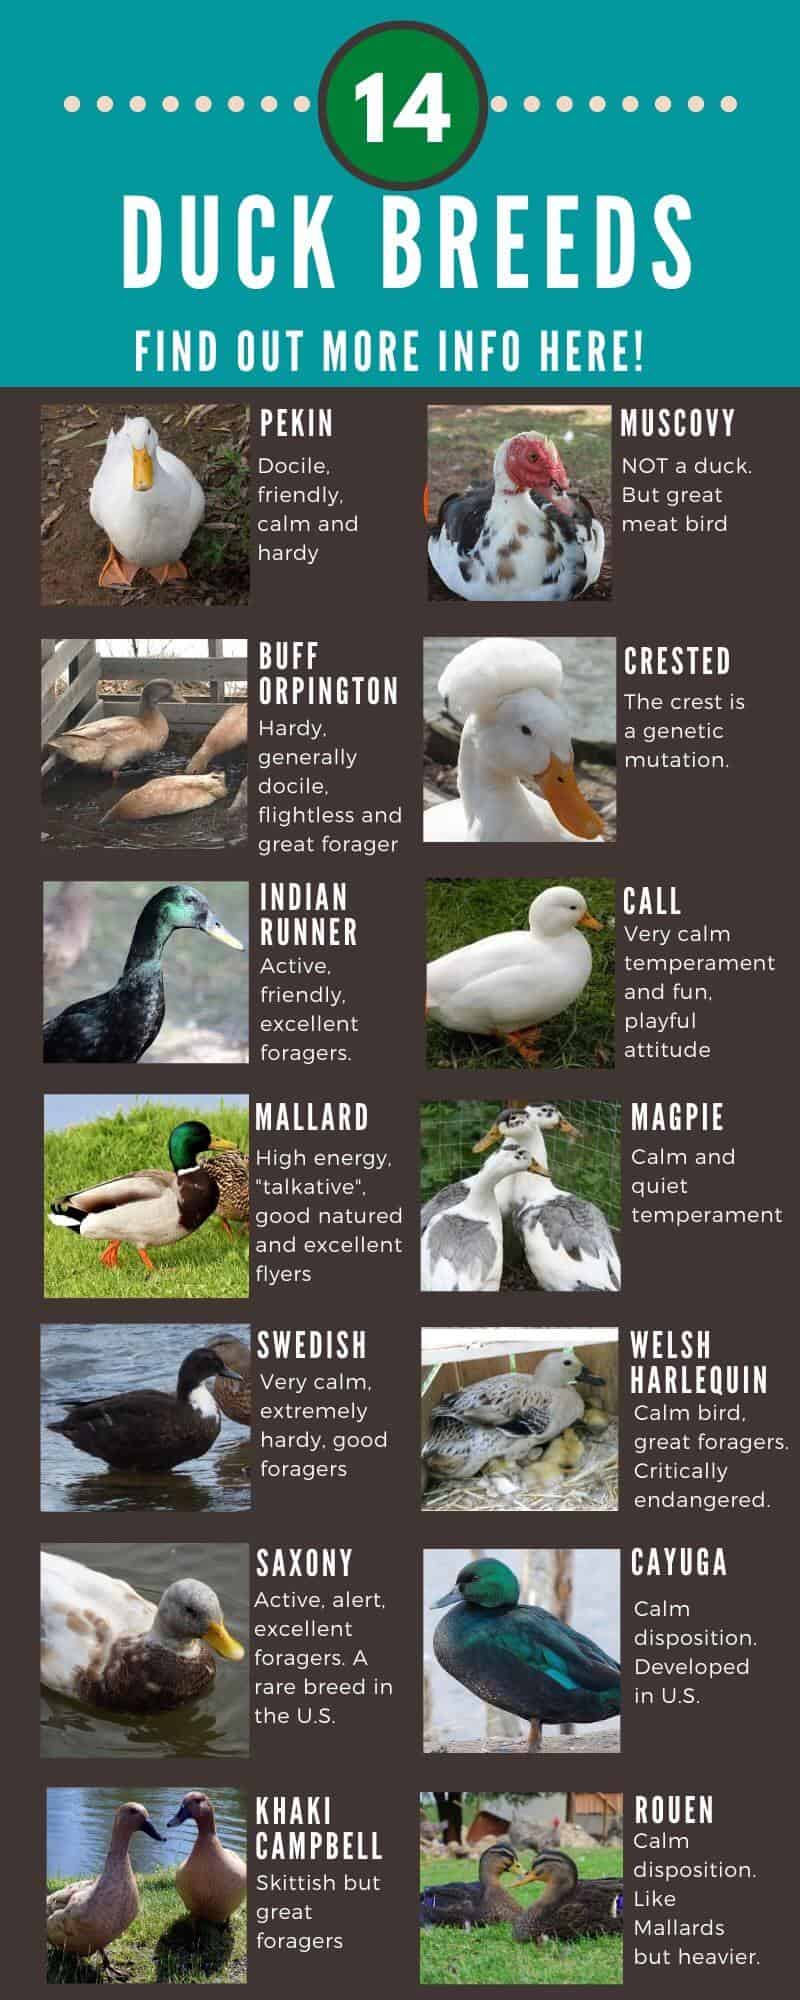 Duck Breeds 14 Breeds YOU Could Own and Their Facts at a Glance